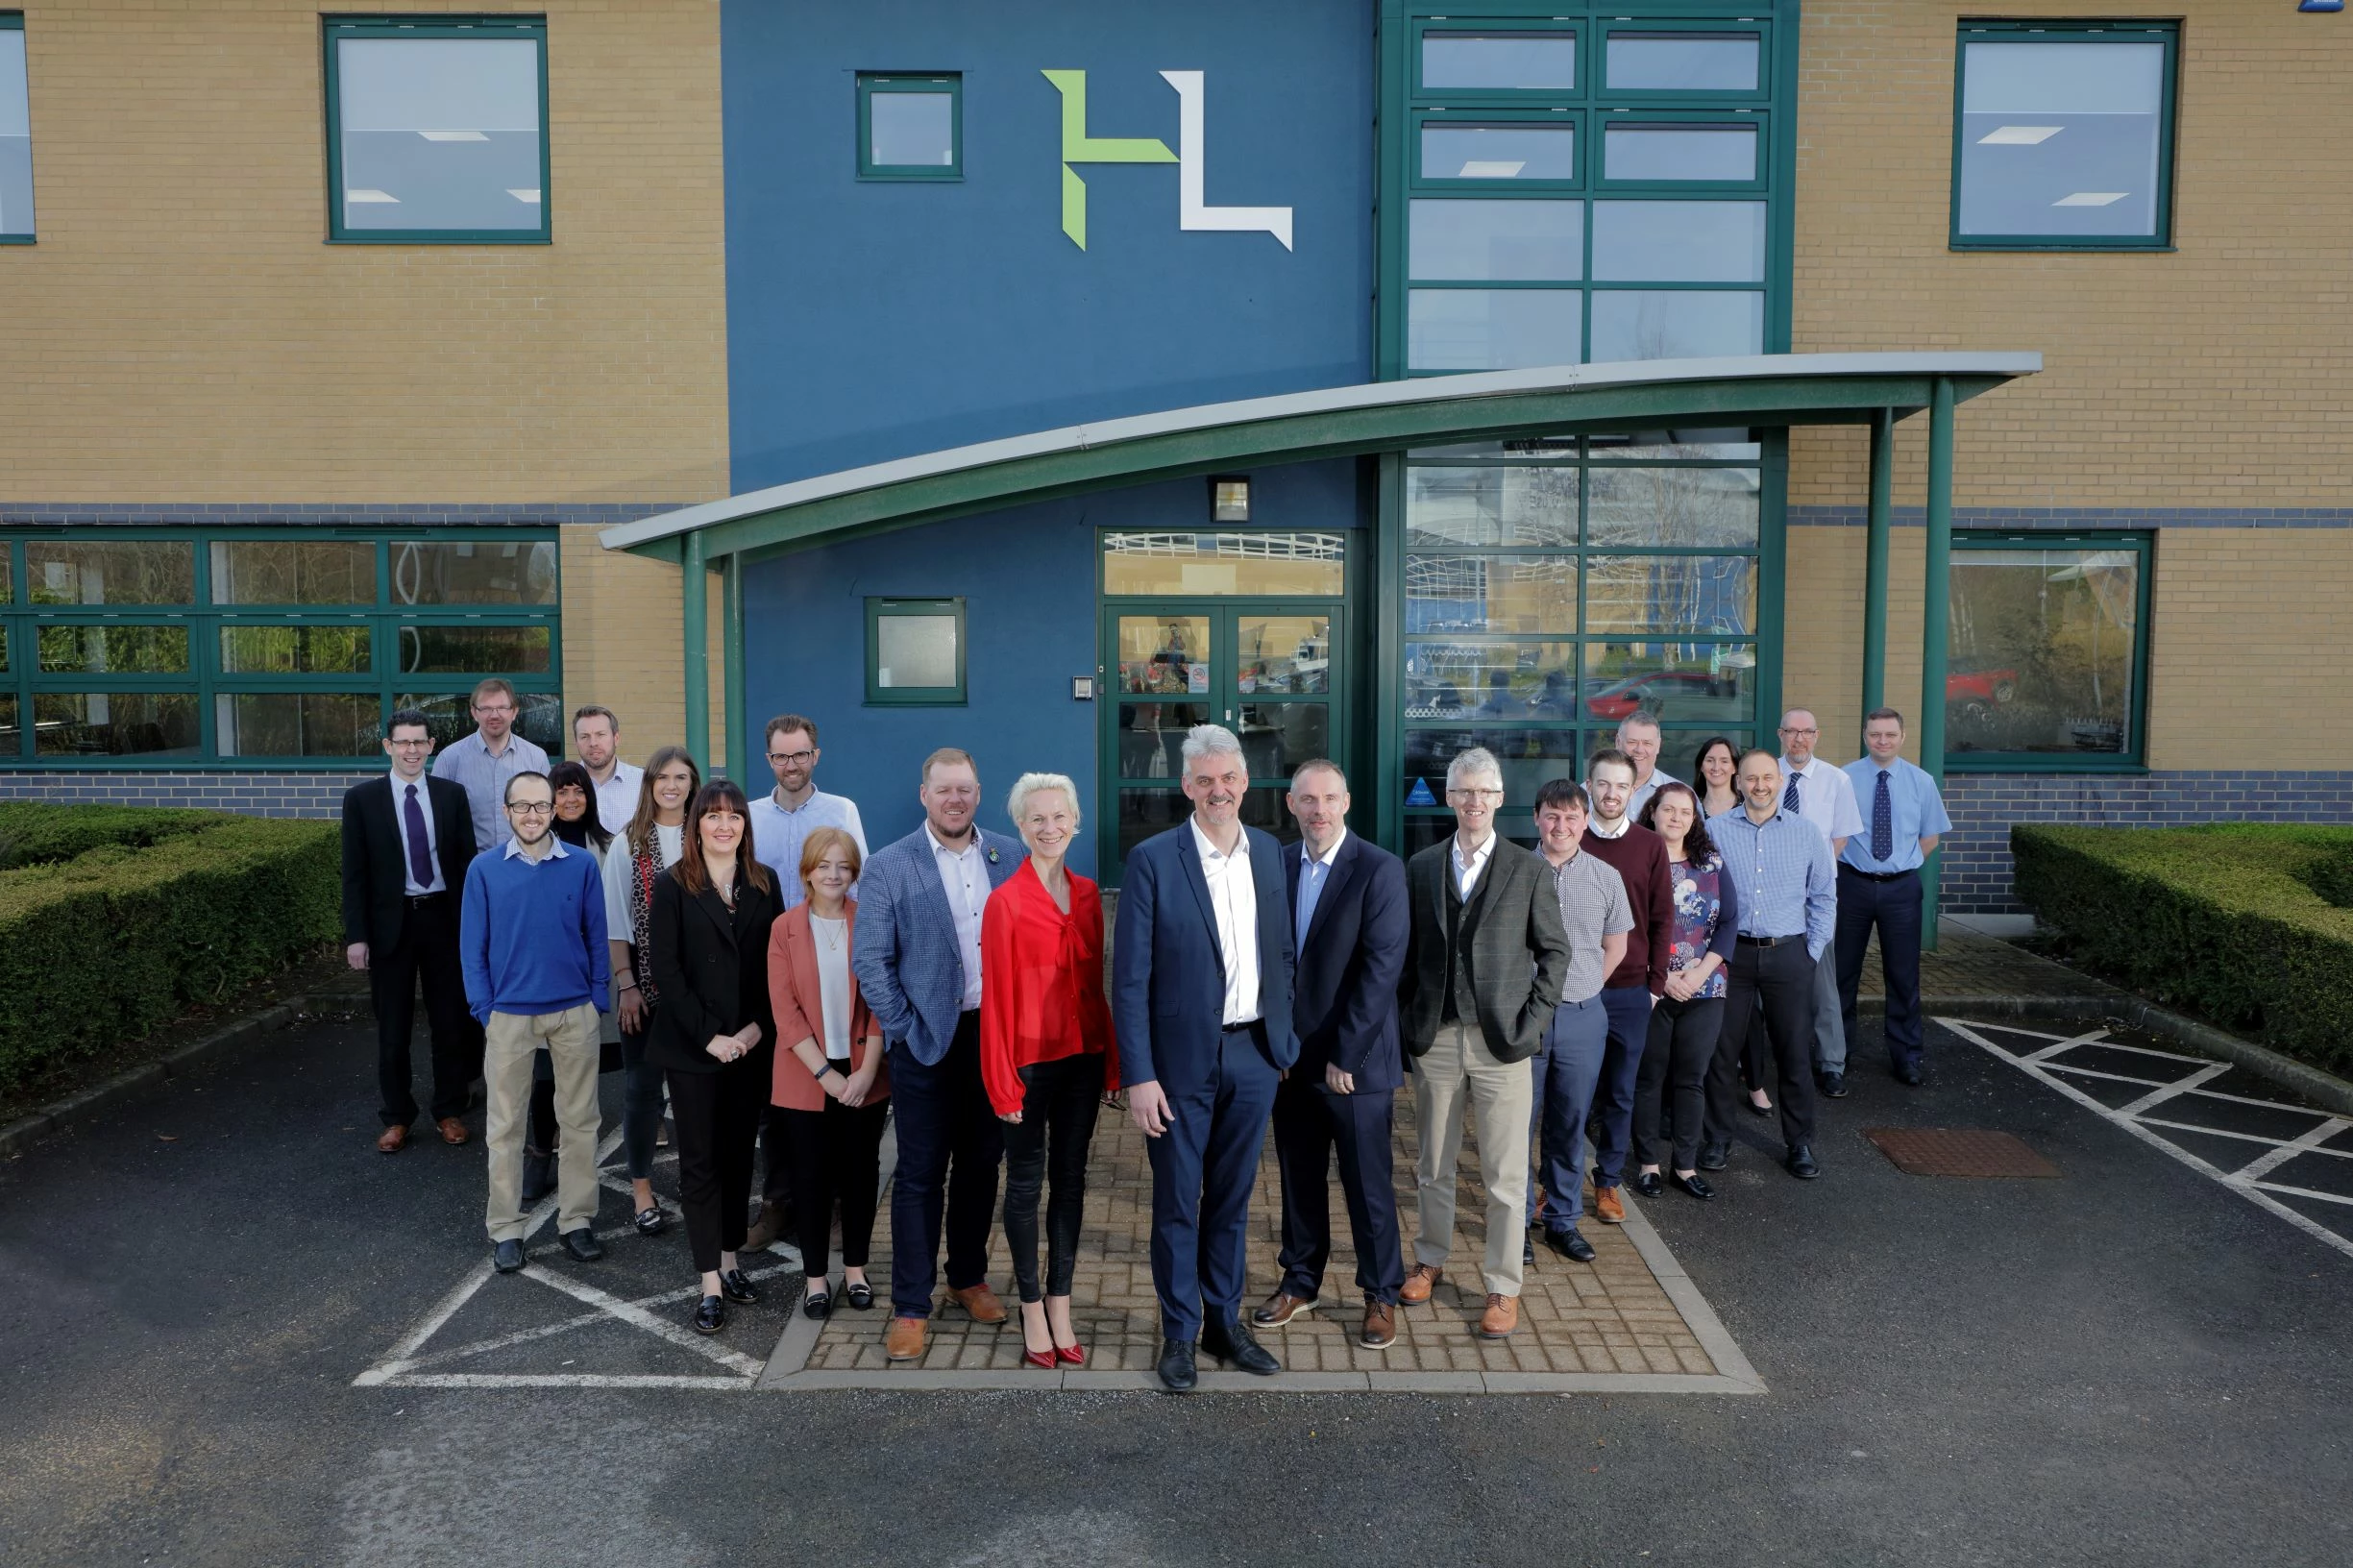 The Howarth Litchfield team outside their new HQ.